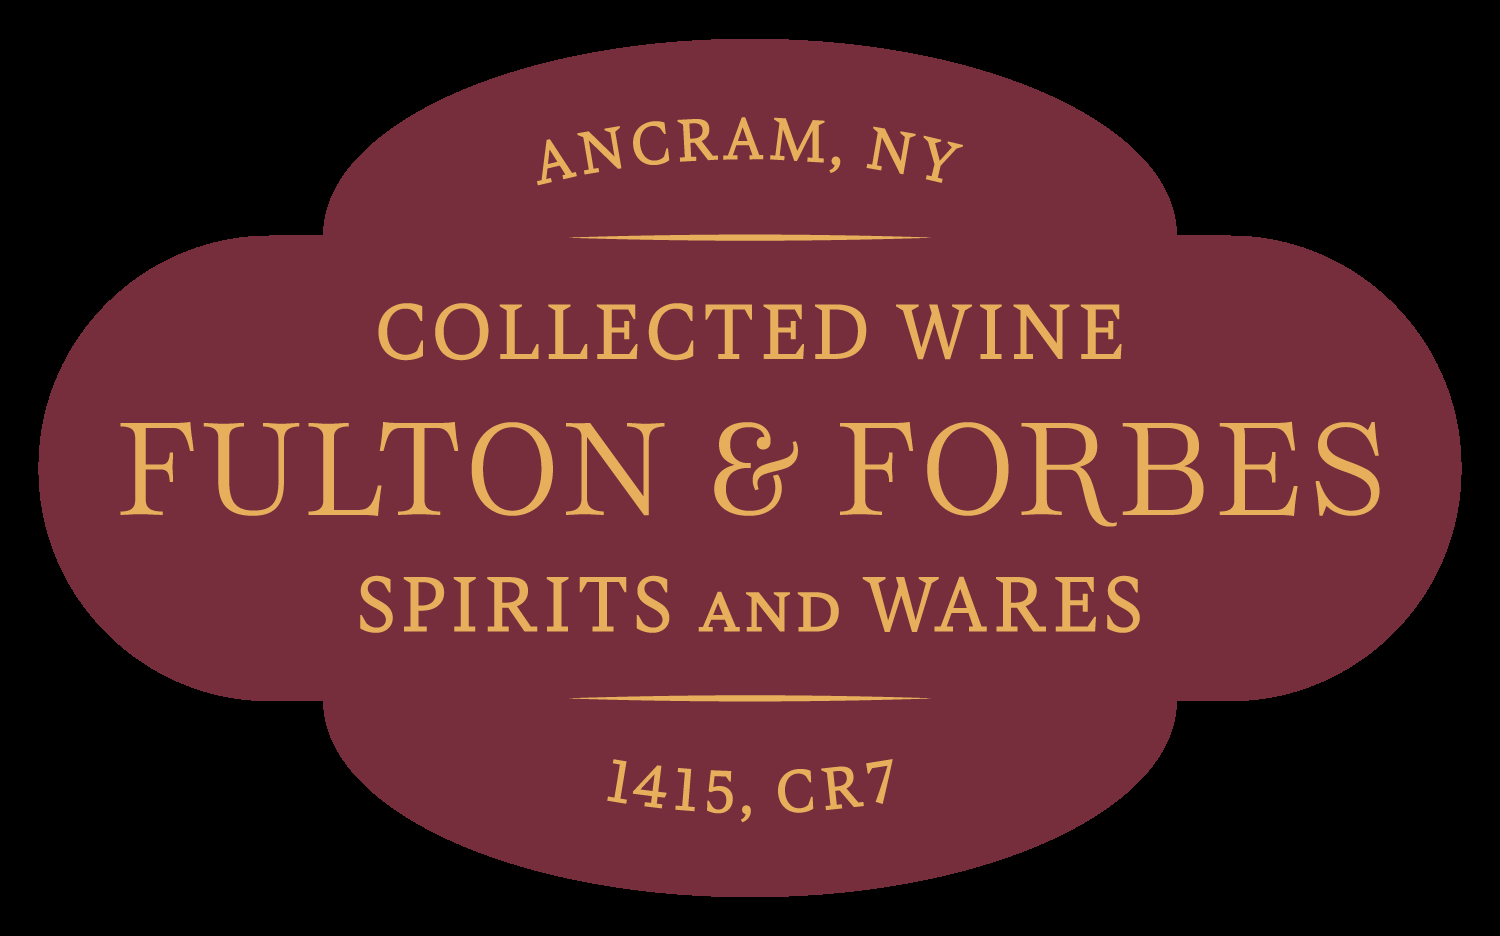 New, Curated Wine and Spirits Store Opens in Ancram, NY. Owned and Operated by Rachel Merriam, Culinary Institute of America Graduate and Sommelier.